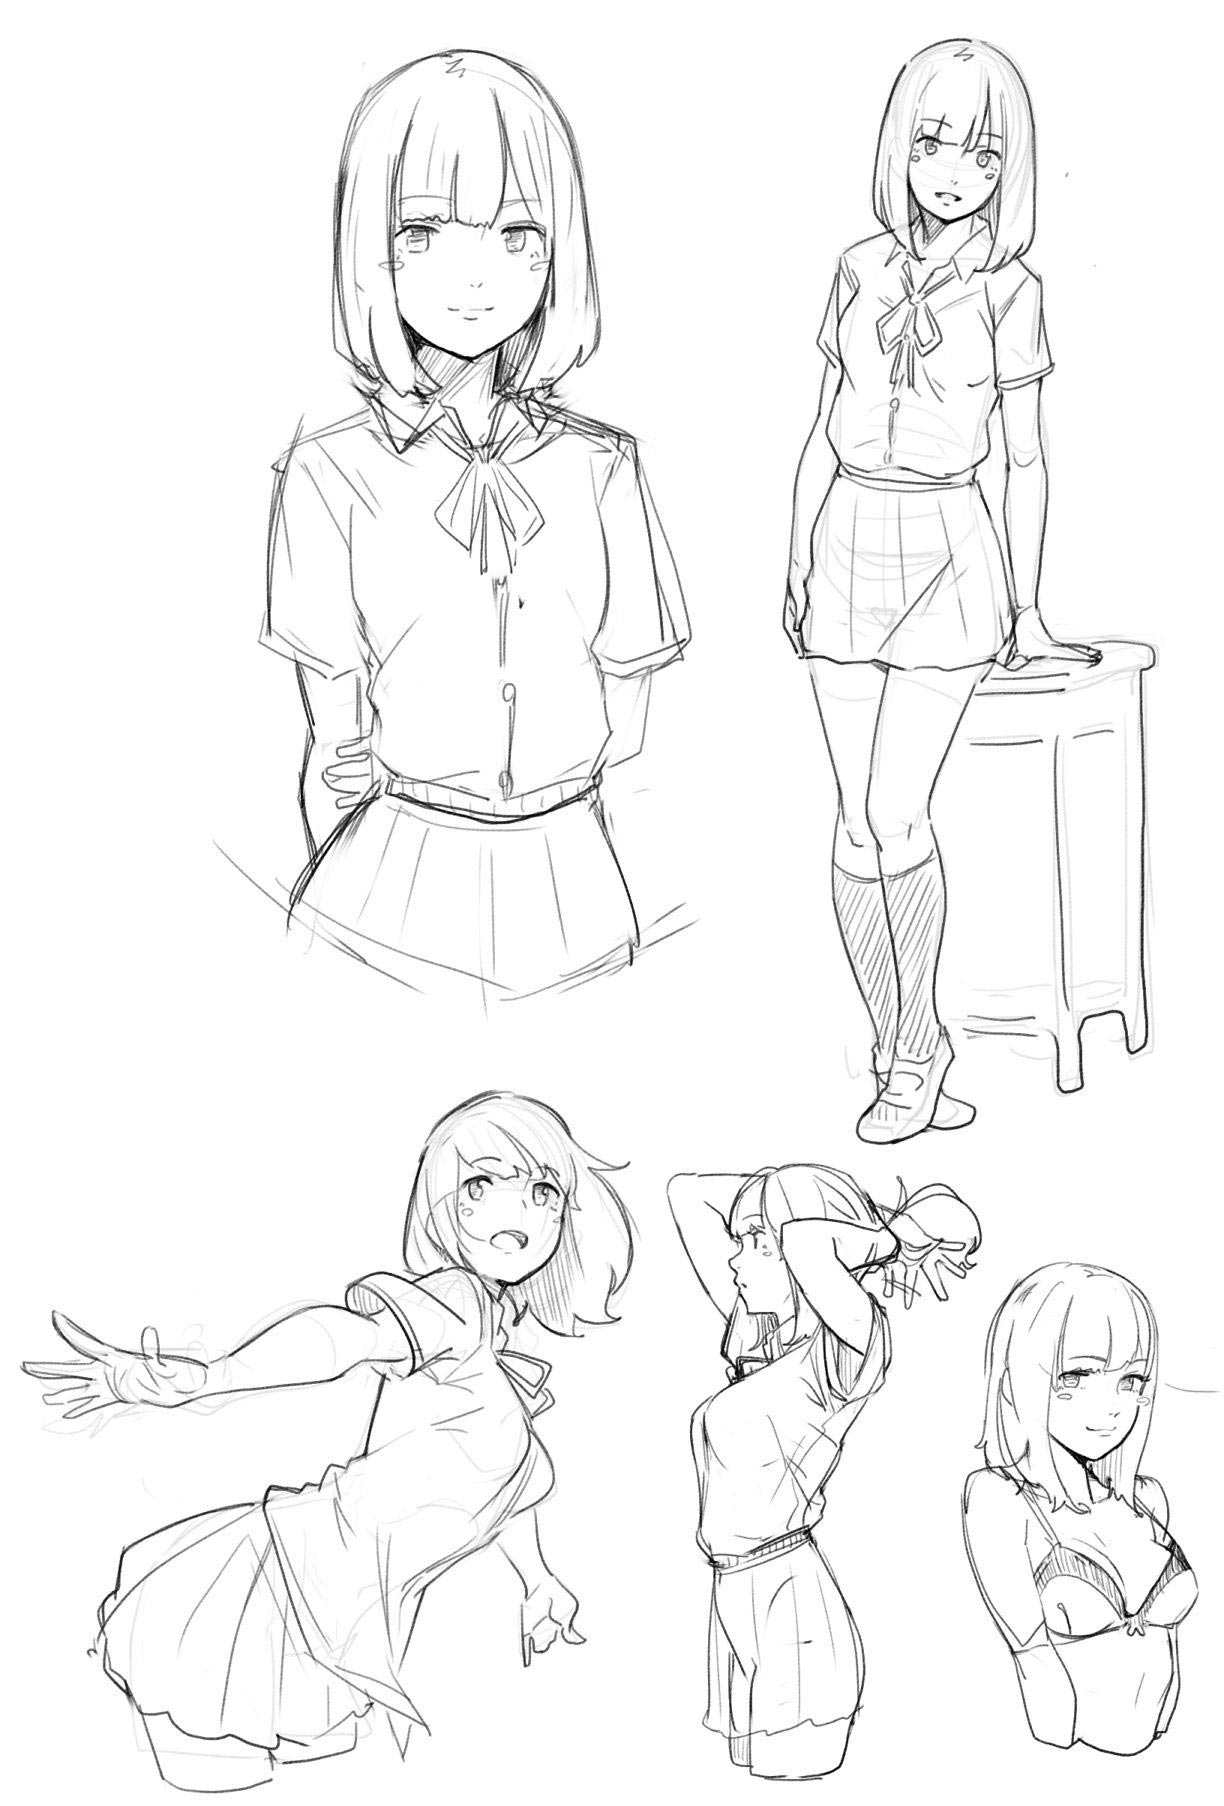 How To Draw an Anime School Girl Step by Step, How To Draw …